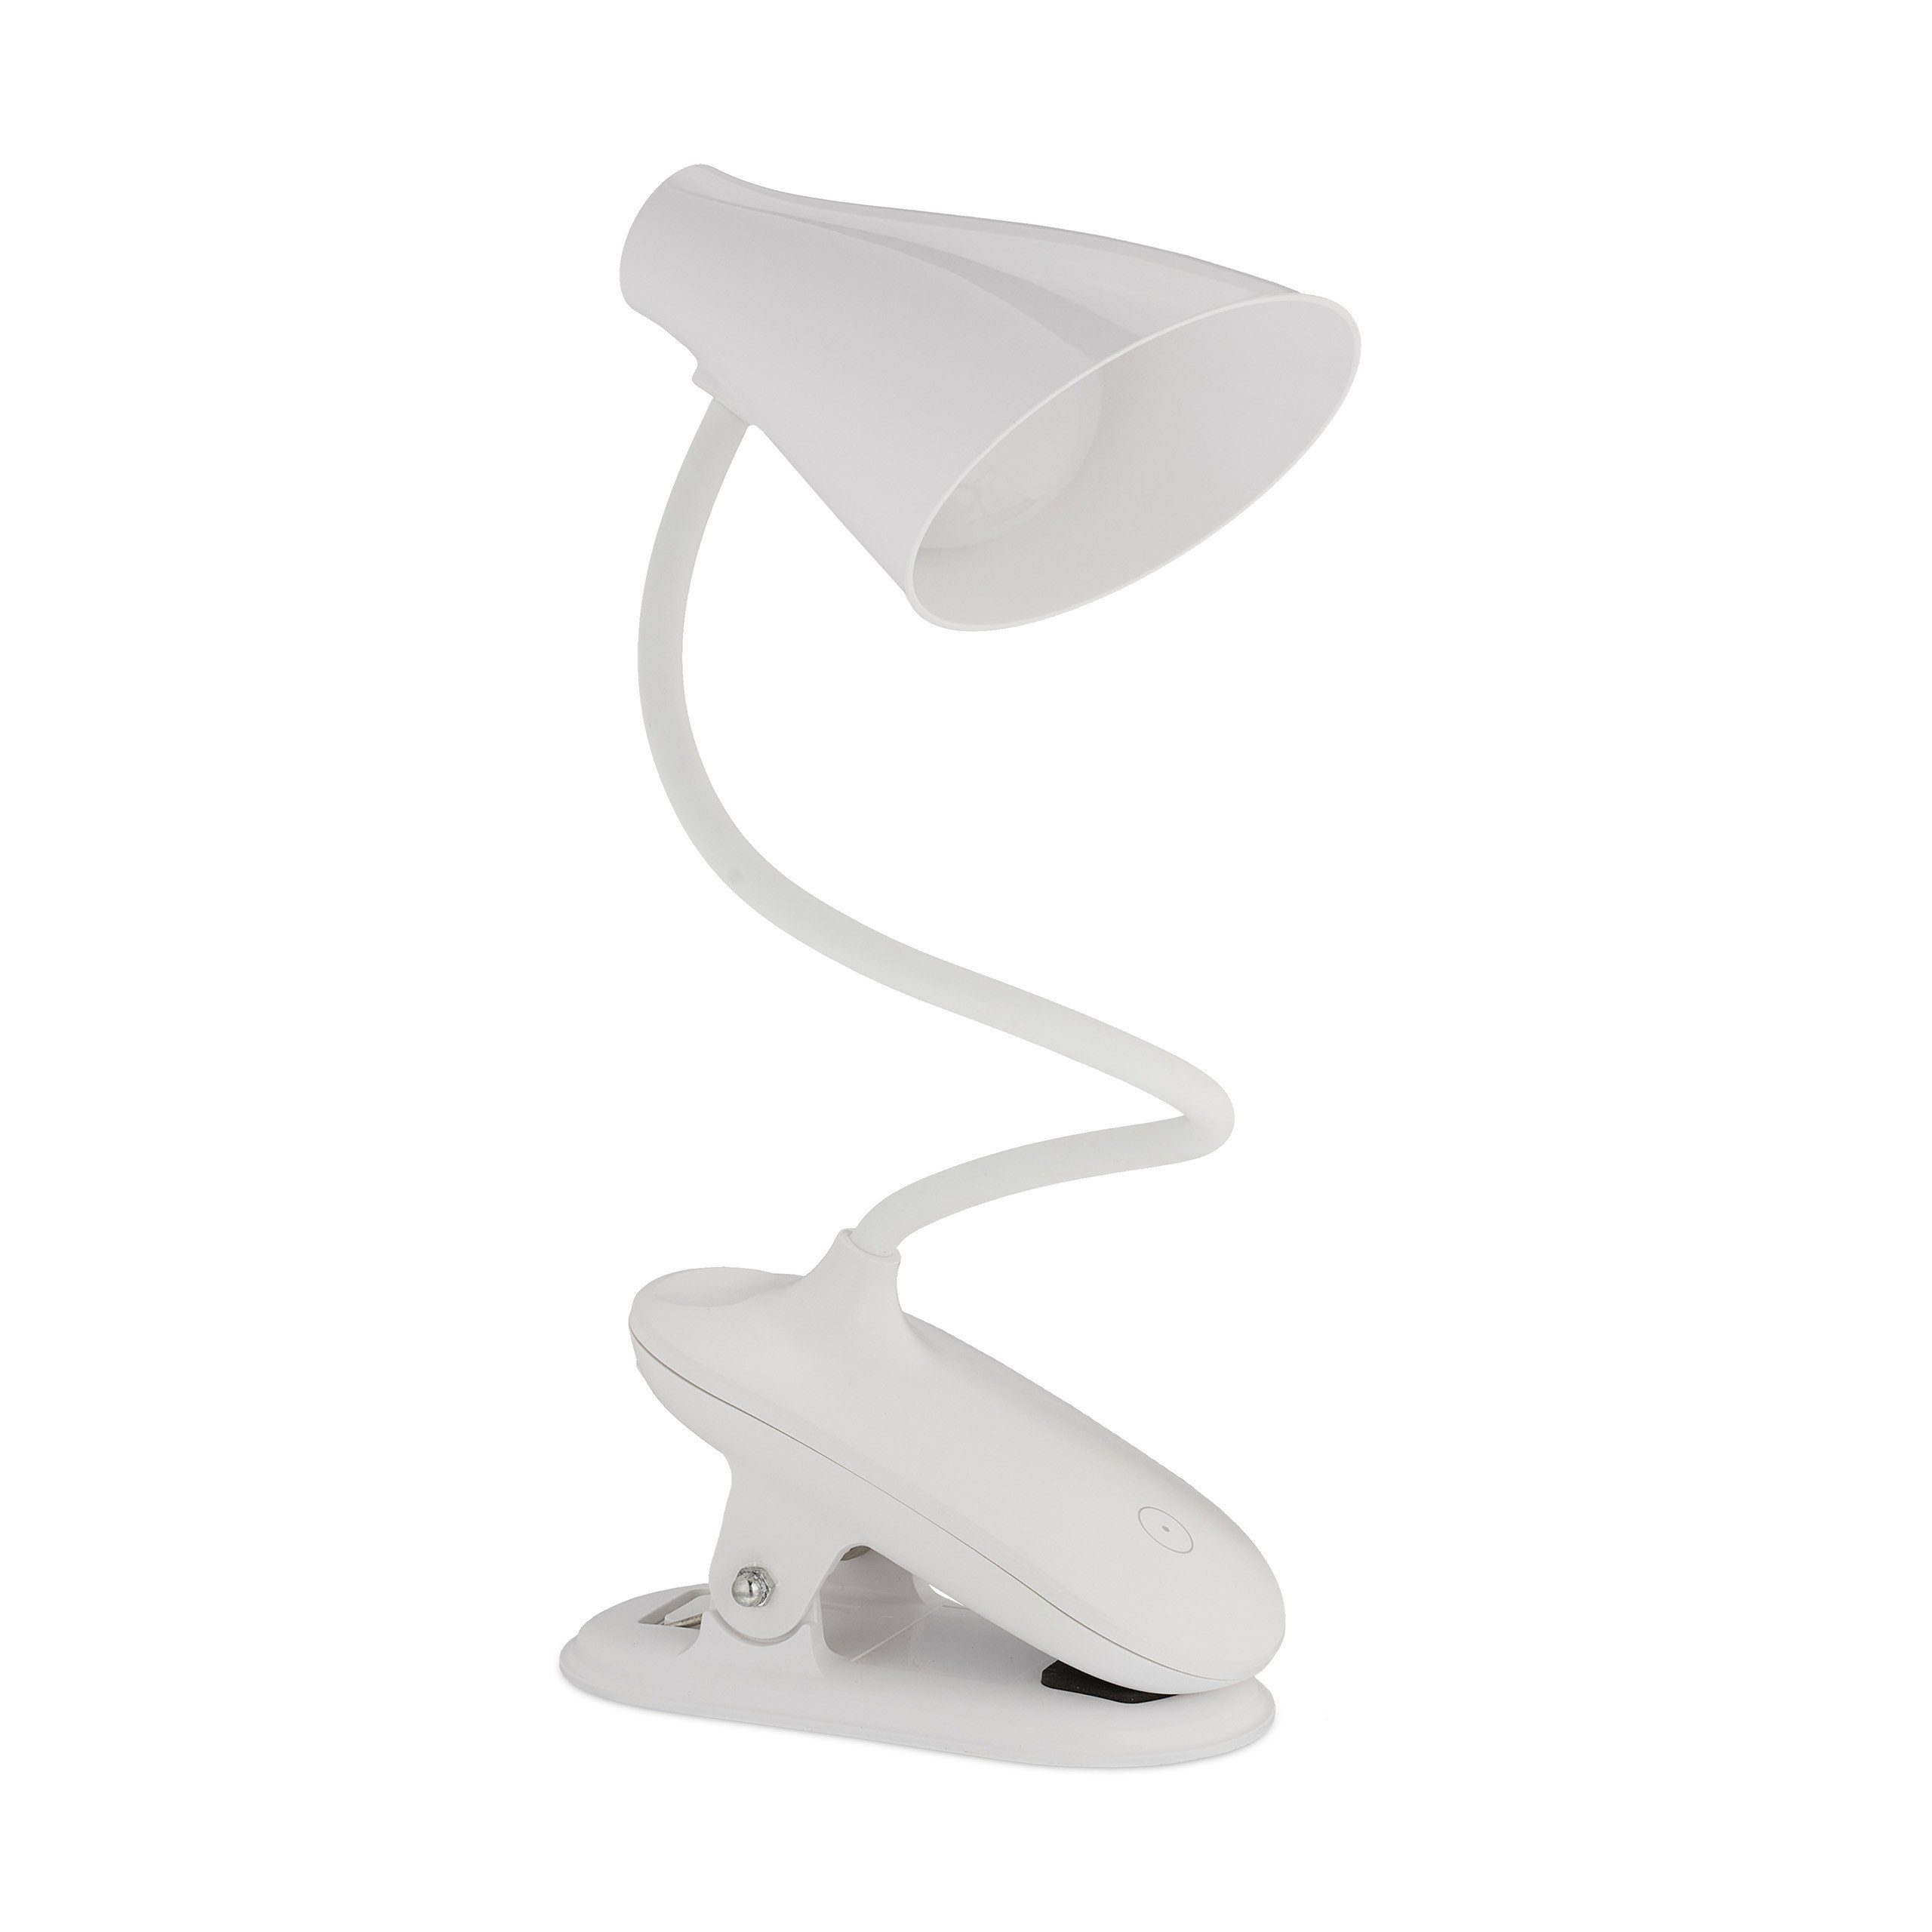 relaxdays LED LED Weiß Klemmlampe mit Touch-Funktion, Leselampe